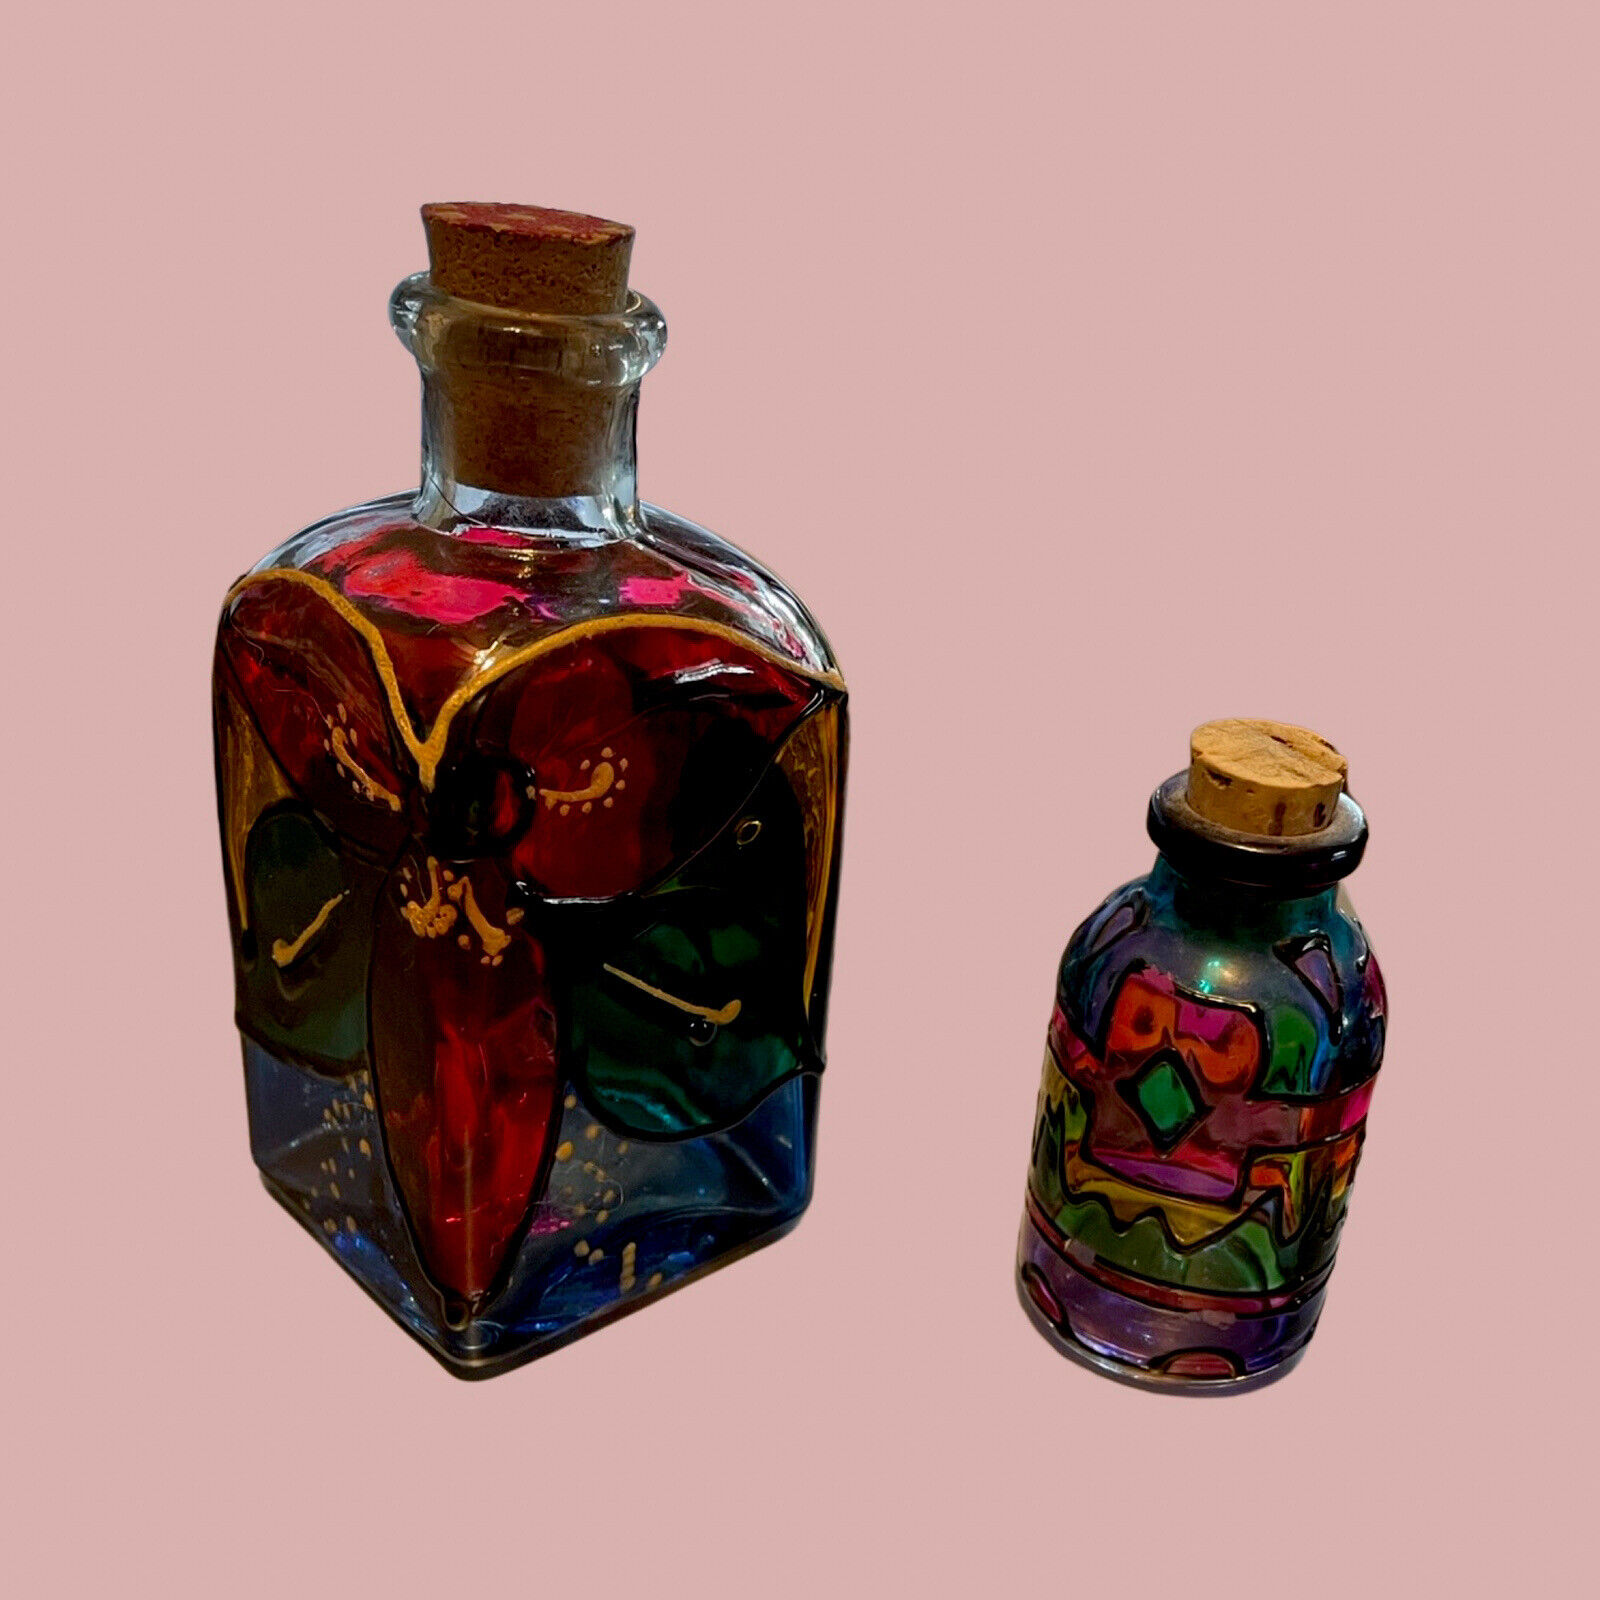 2 Vintage Stained Glass Bottles